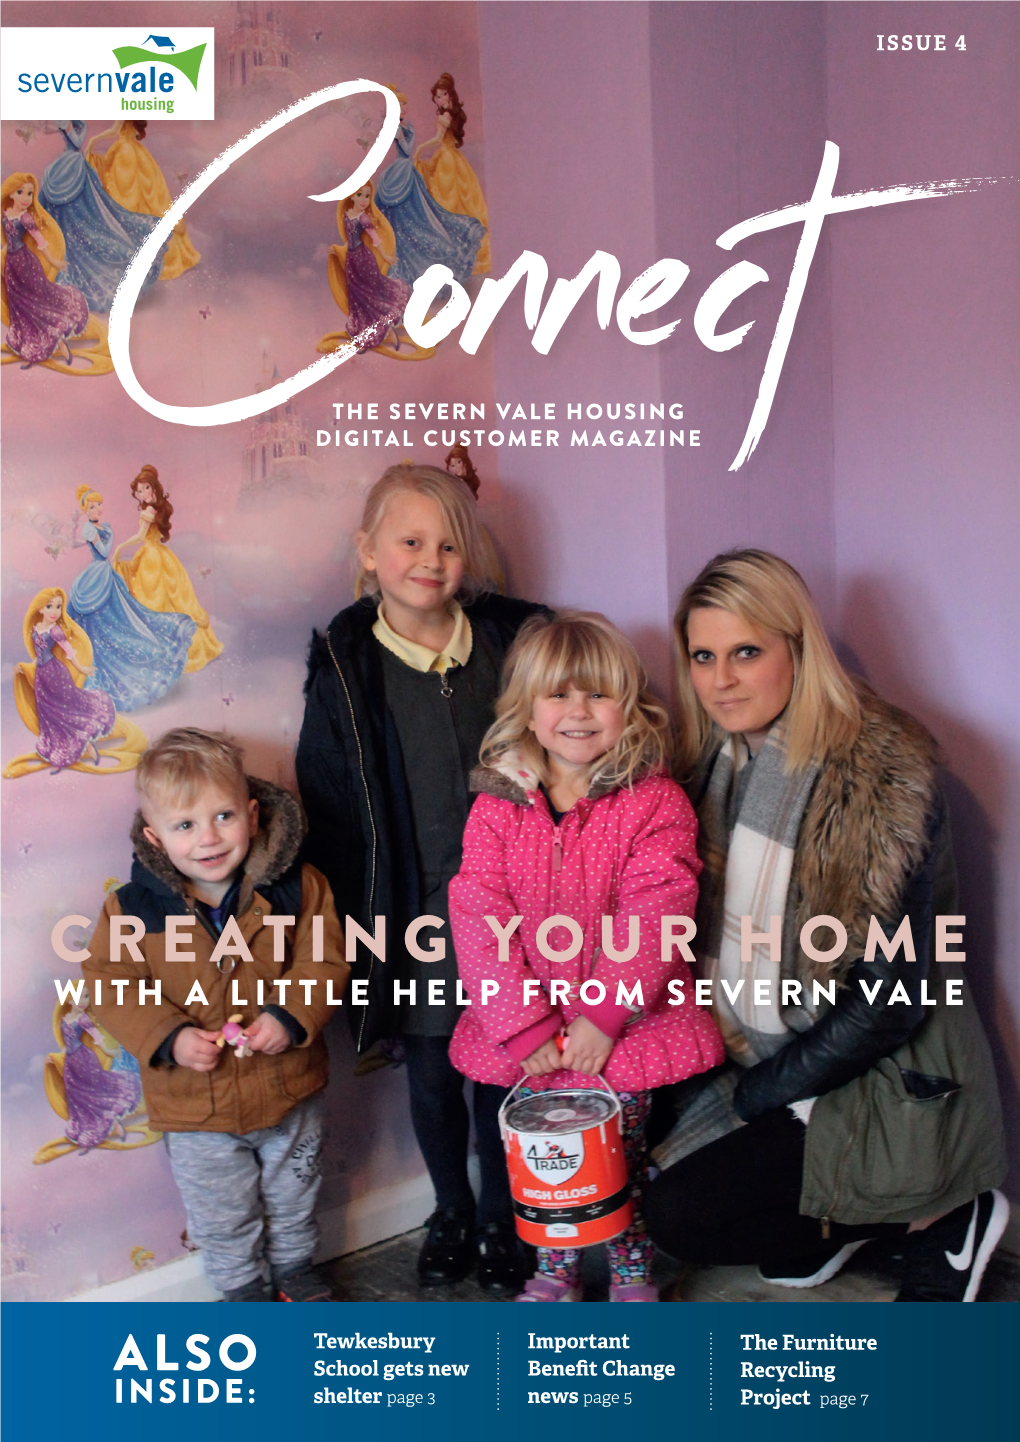 Creating Your Home with a Little Help from Severn Vale